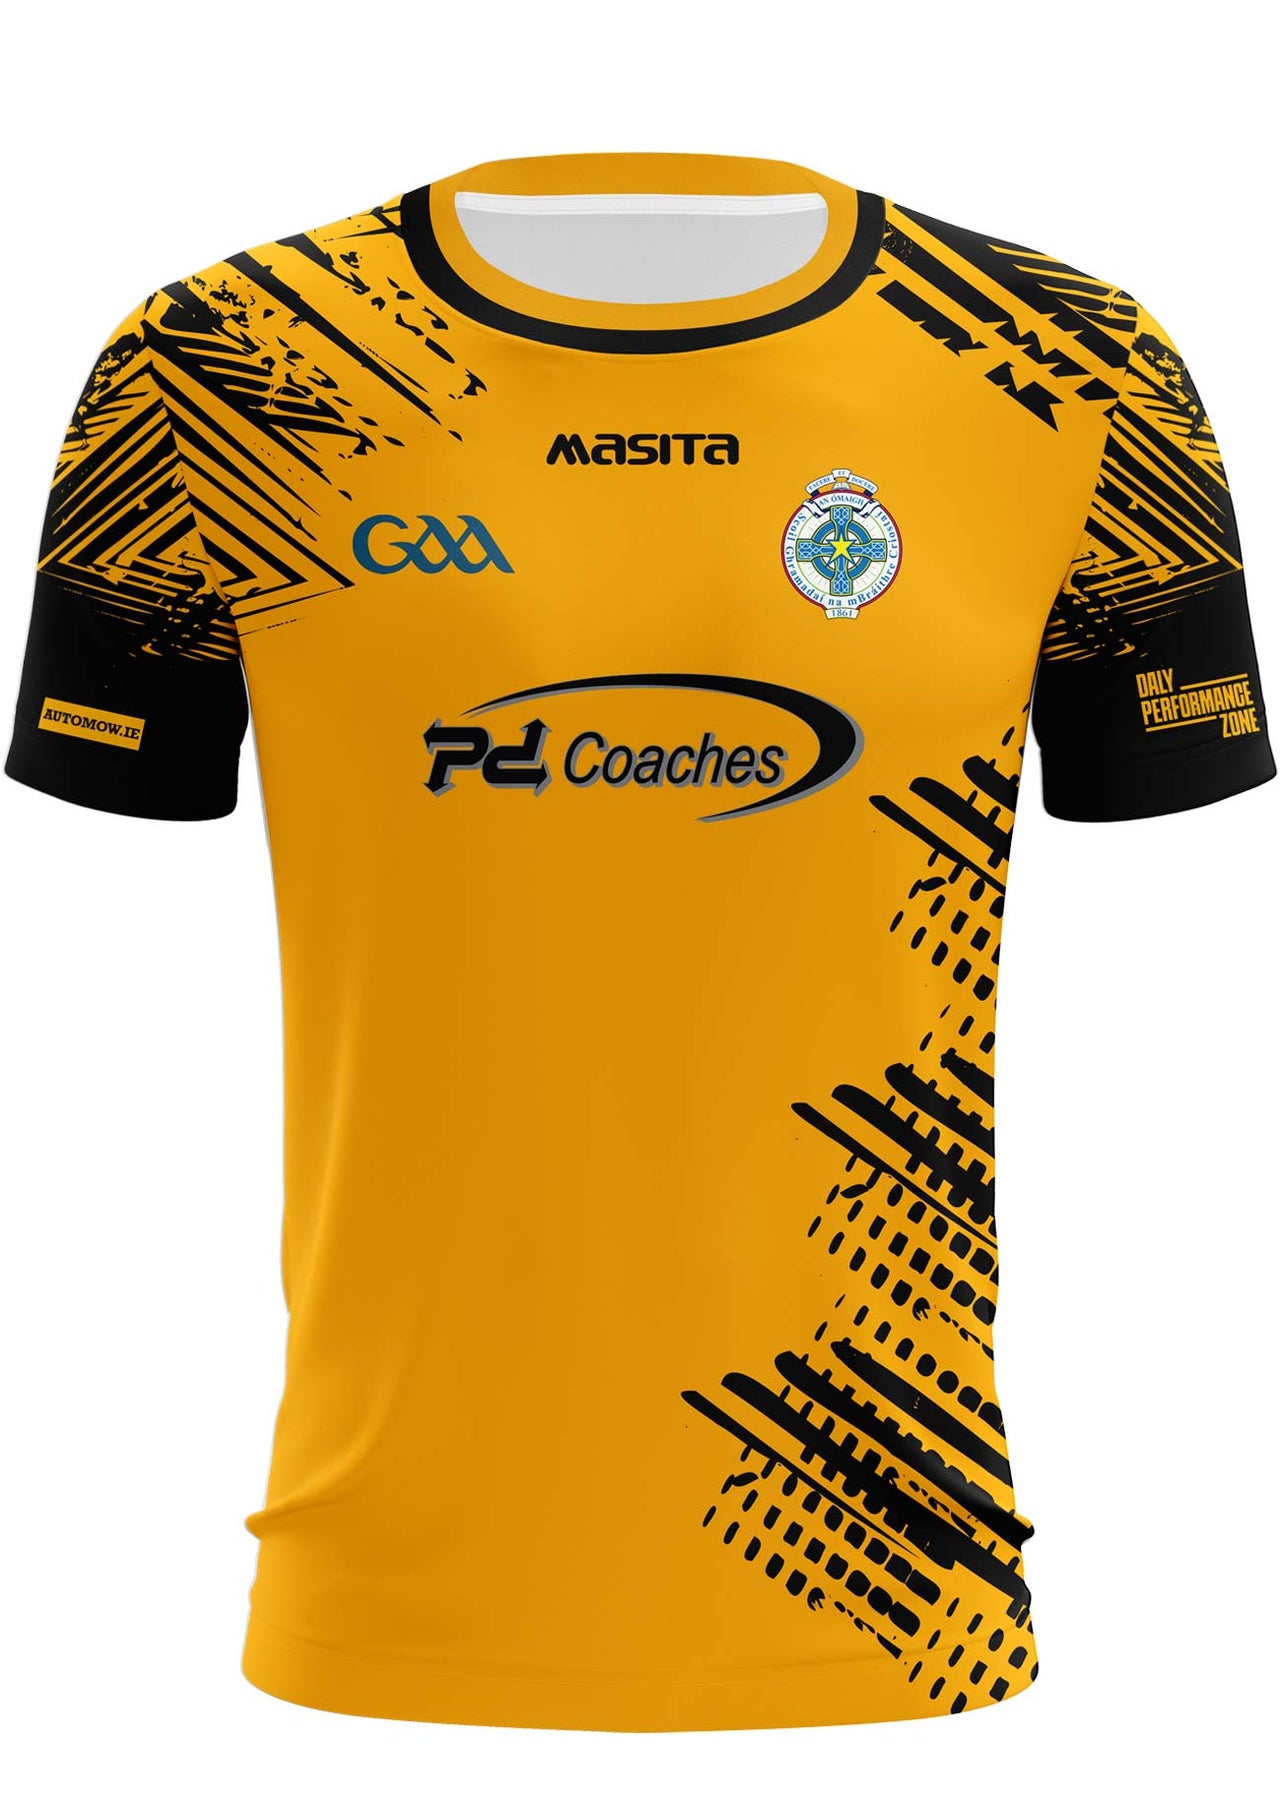 Omagh CBS Goalkeeper Jersey Player Fit